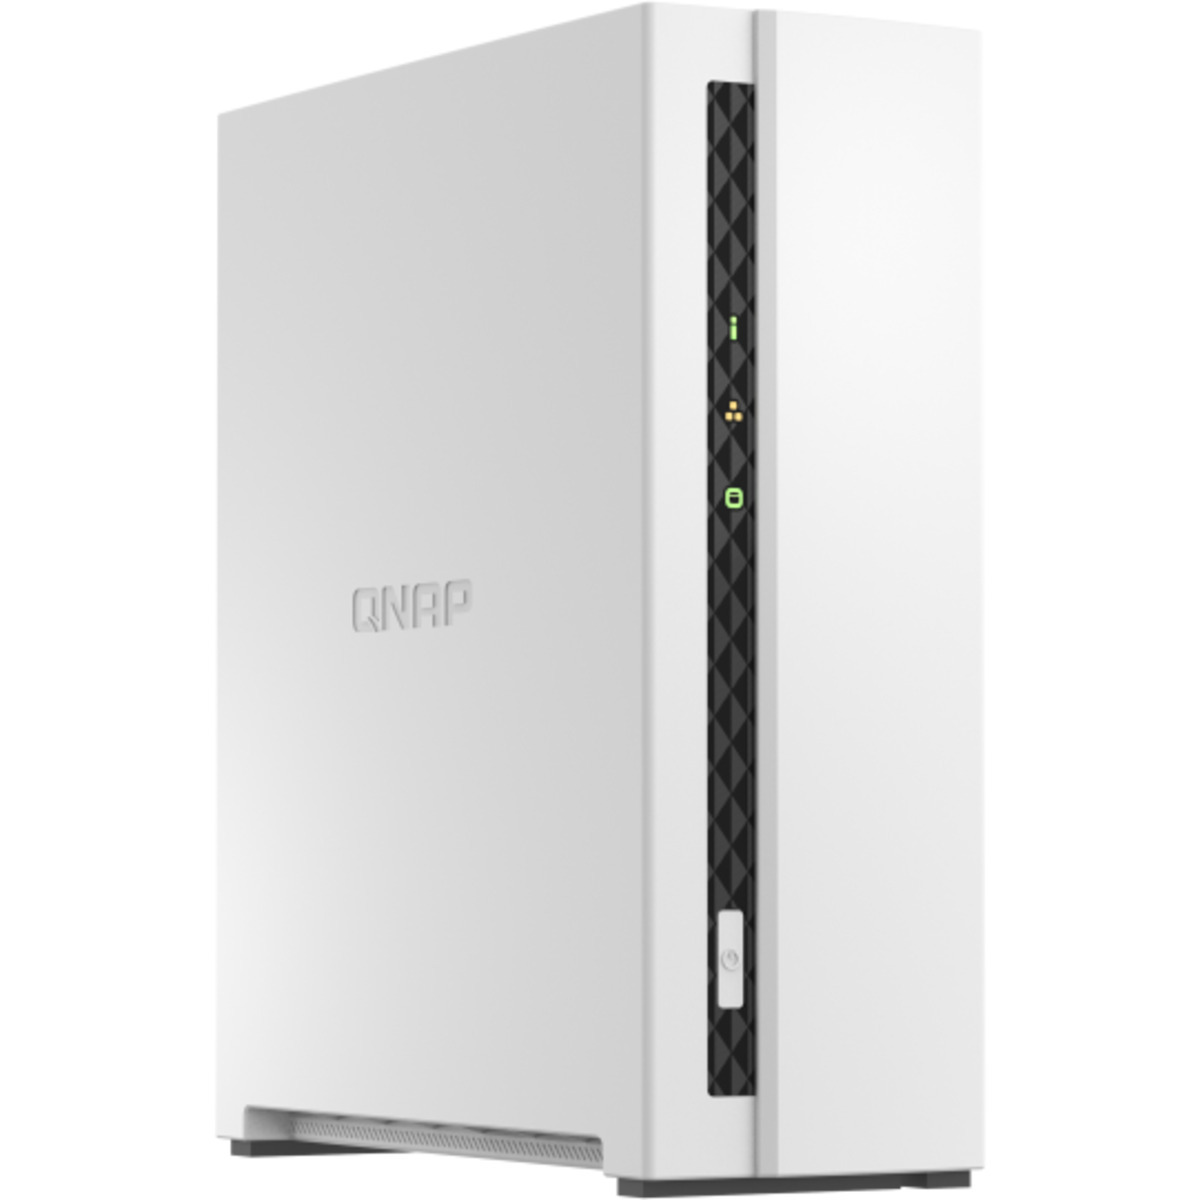 buy QNAP TS-133 6tb Desktop NAS - Network Attached Storage Device 1x6000gb Western Digital Red WD60EFAX 3.5 5400rpm SATA 6Gb/s HDD NAS Class Drives Installed - Burn-In Tested - ON SALE - nas headquarters buy network attached storage server device das new raid-5 free shipping simply usa TS-133